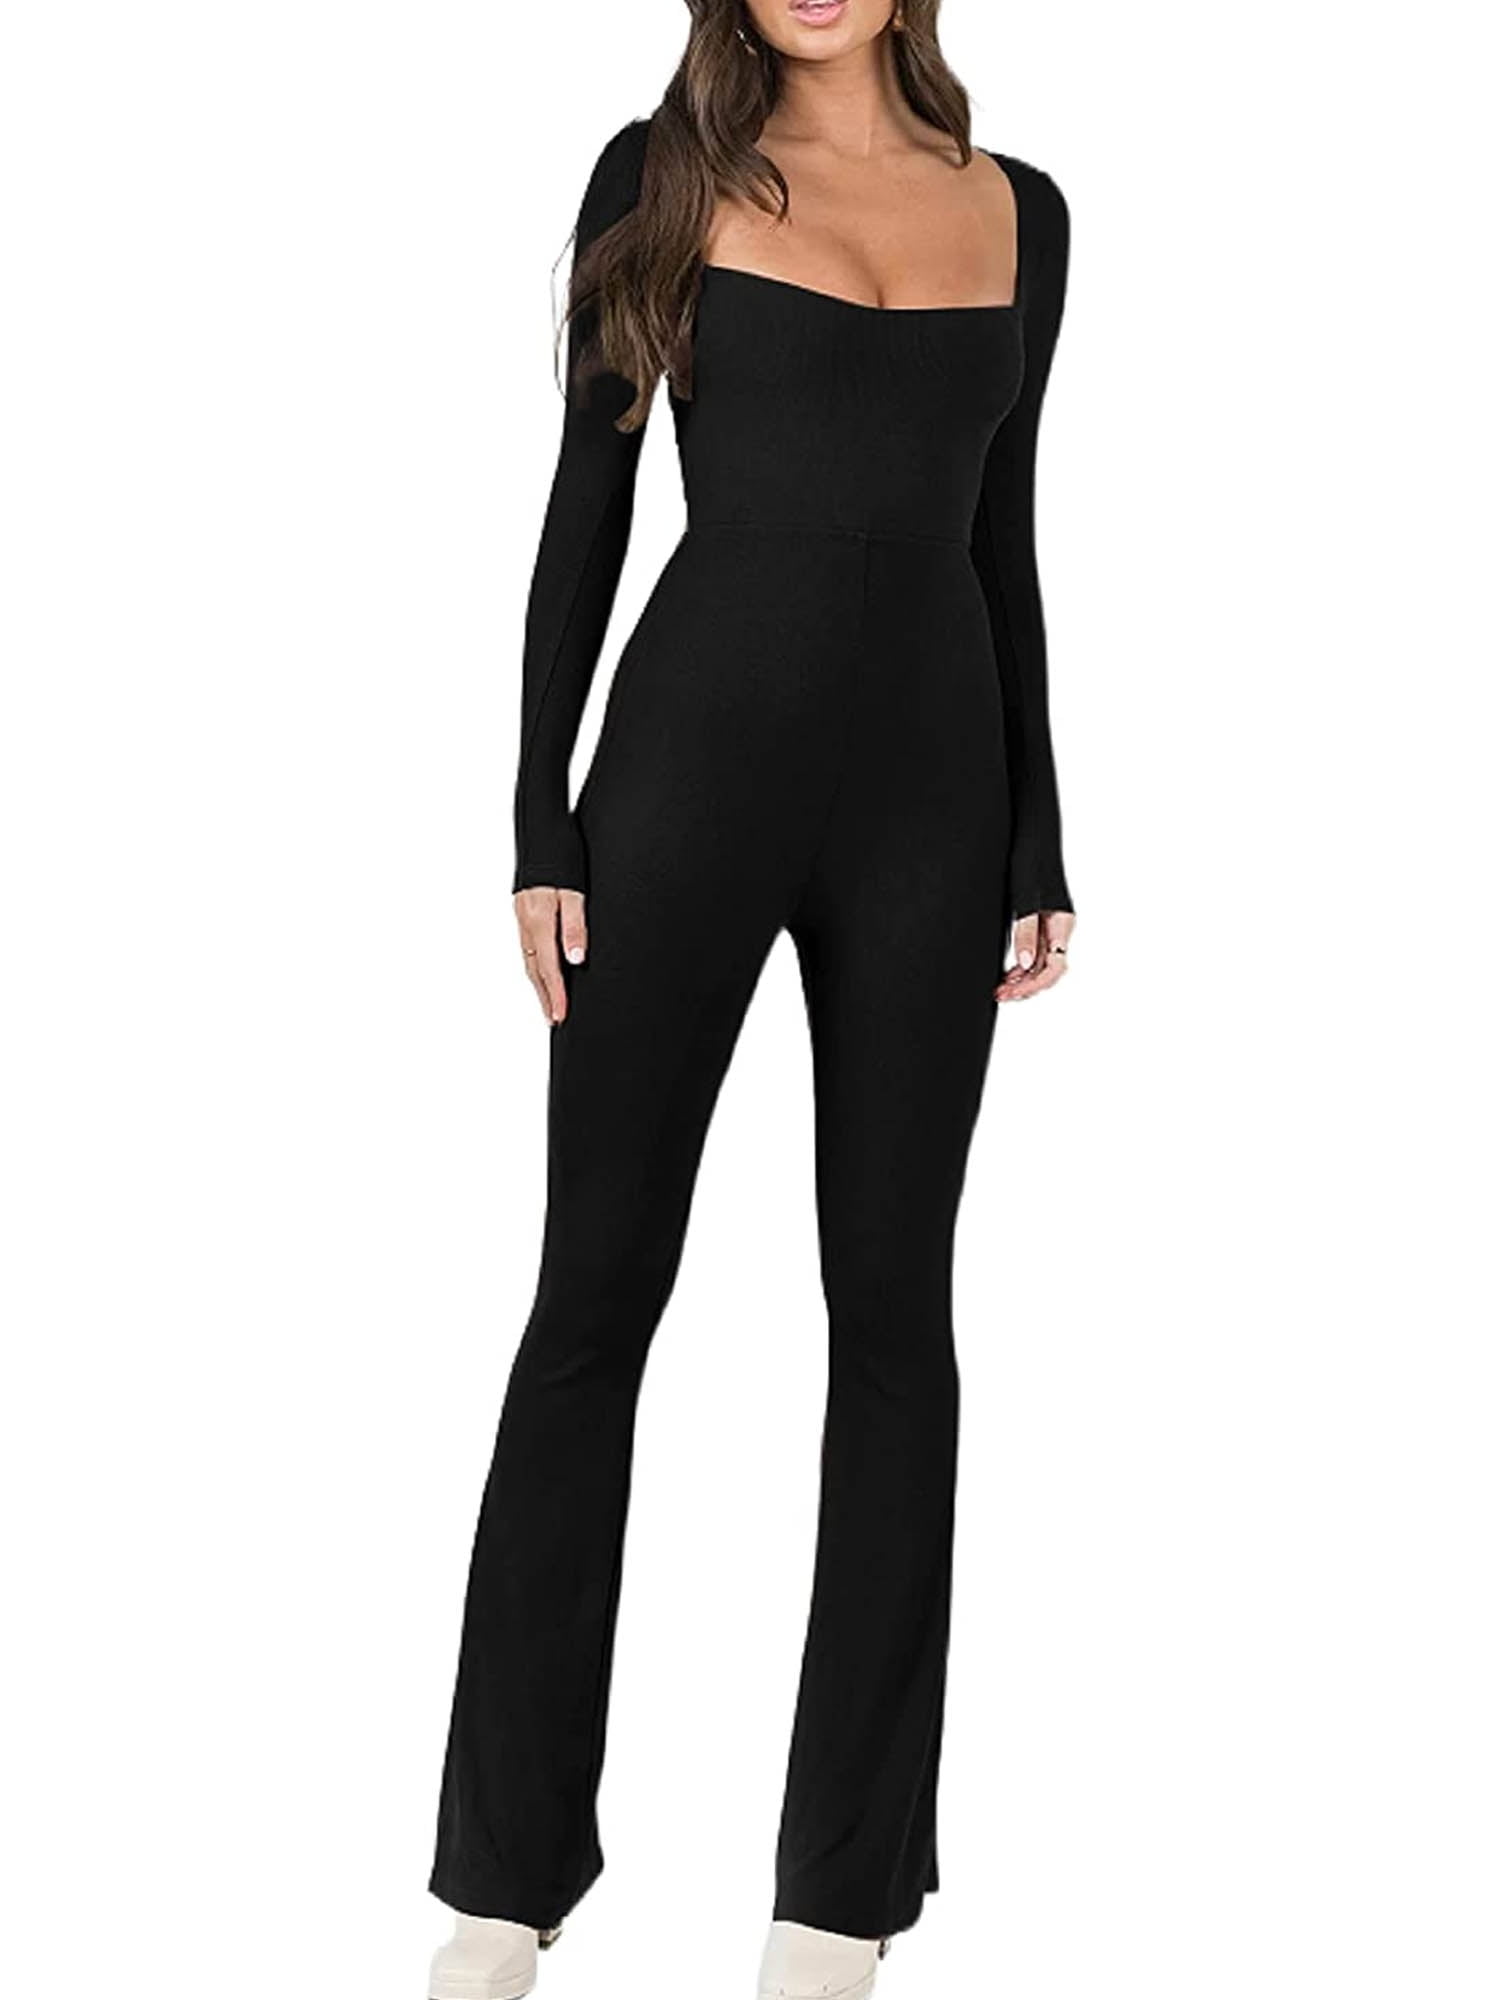 Sunisery Women Sexy Ribbed Yoga Jumpsuit Long Sleeve Square